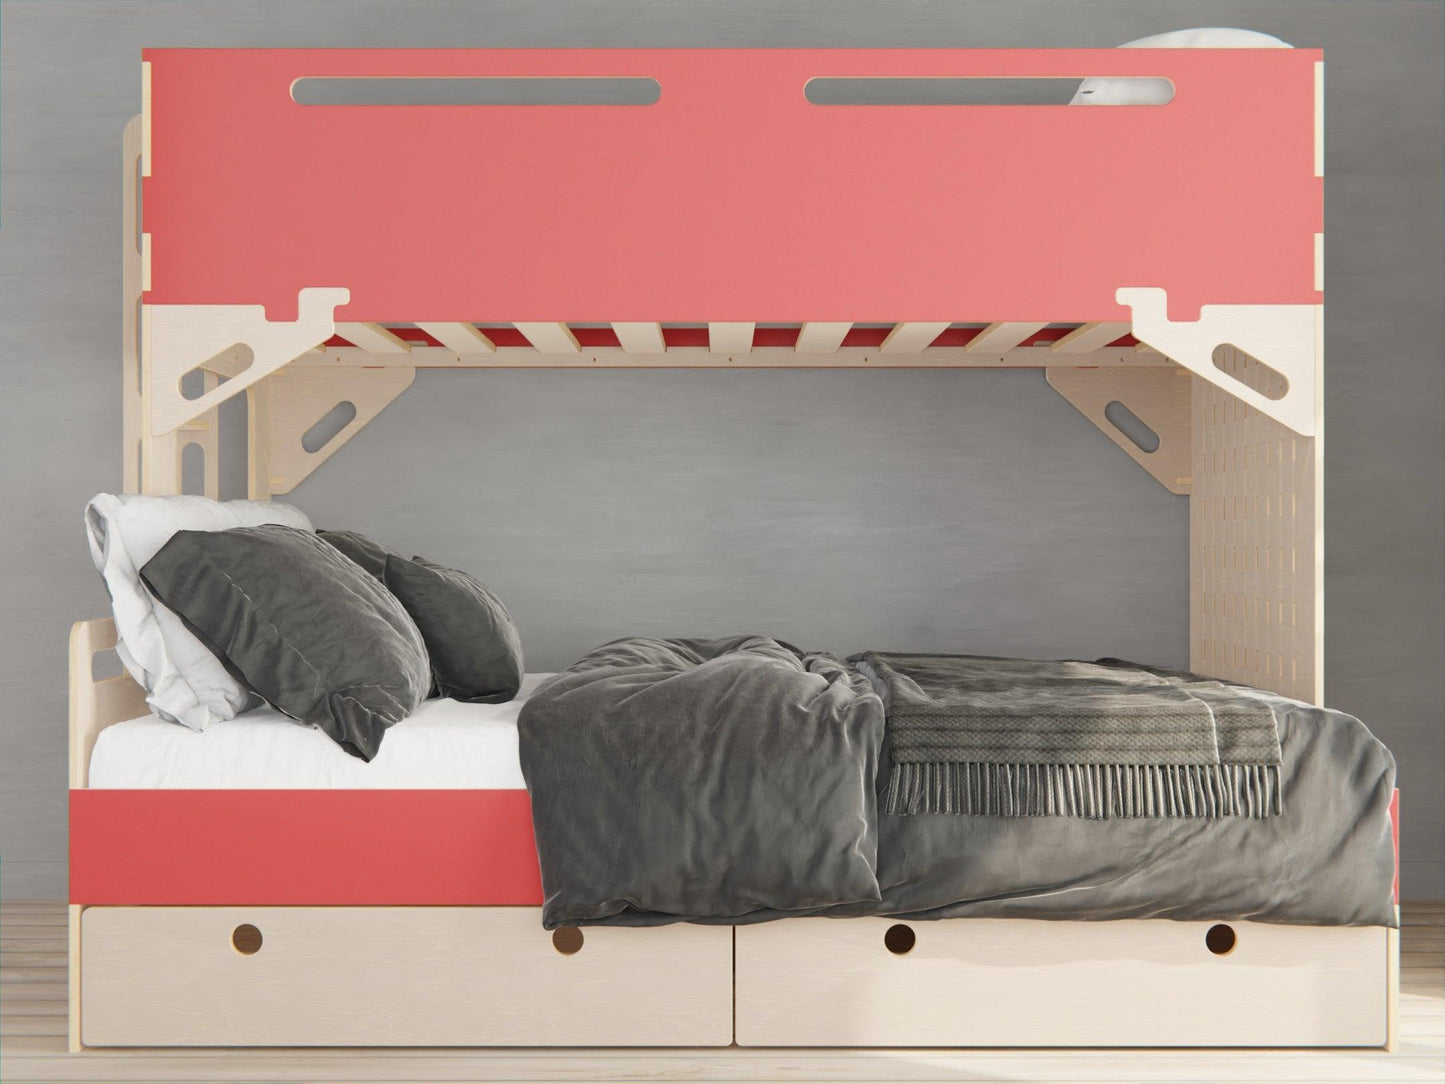 Maximise your space with our family-friendly plywood bunk beds in red. Bed with included storage drawers. Convenience meets comfort.